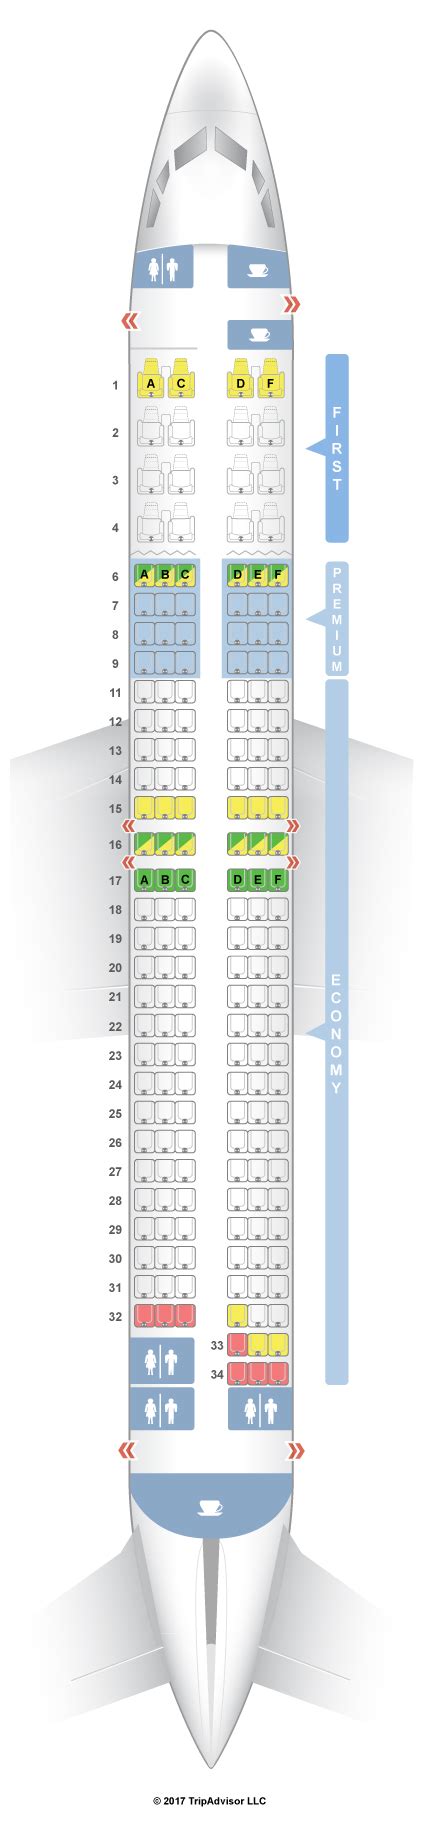 Seatguru alaska 737-900. This diagram shows the seat map for our Boeing 737-800 aircraft. Our Boeing 737-800 aircraft have two cabins: First Class, and Main Cabin. The First Class cabin has 12 seats in rows 1-3 of the plane. As you board the plane, the First Class seats are lettered, from left to right, F and D, the aisle, then C and A. 